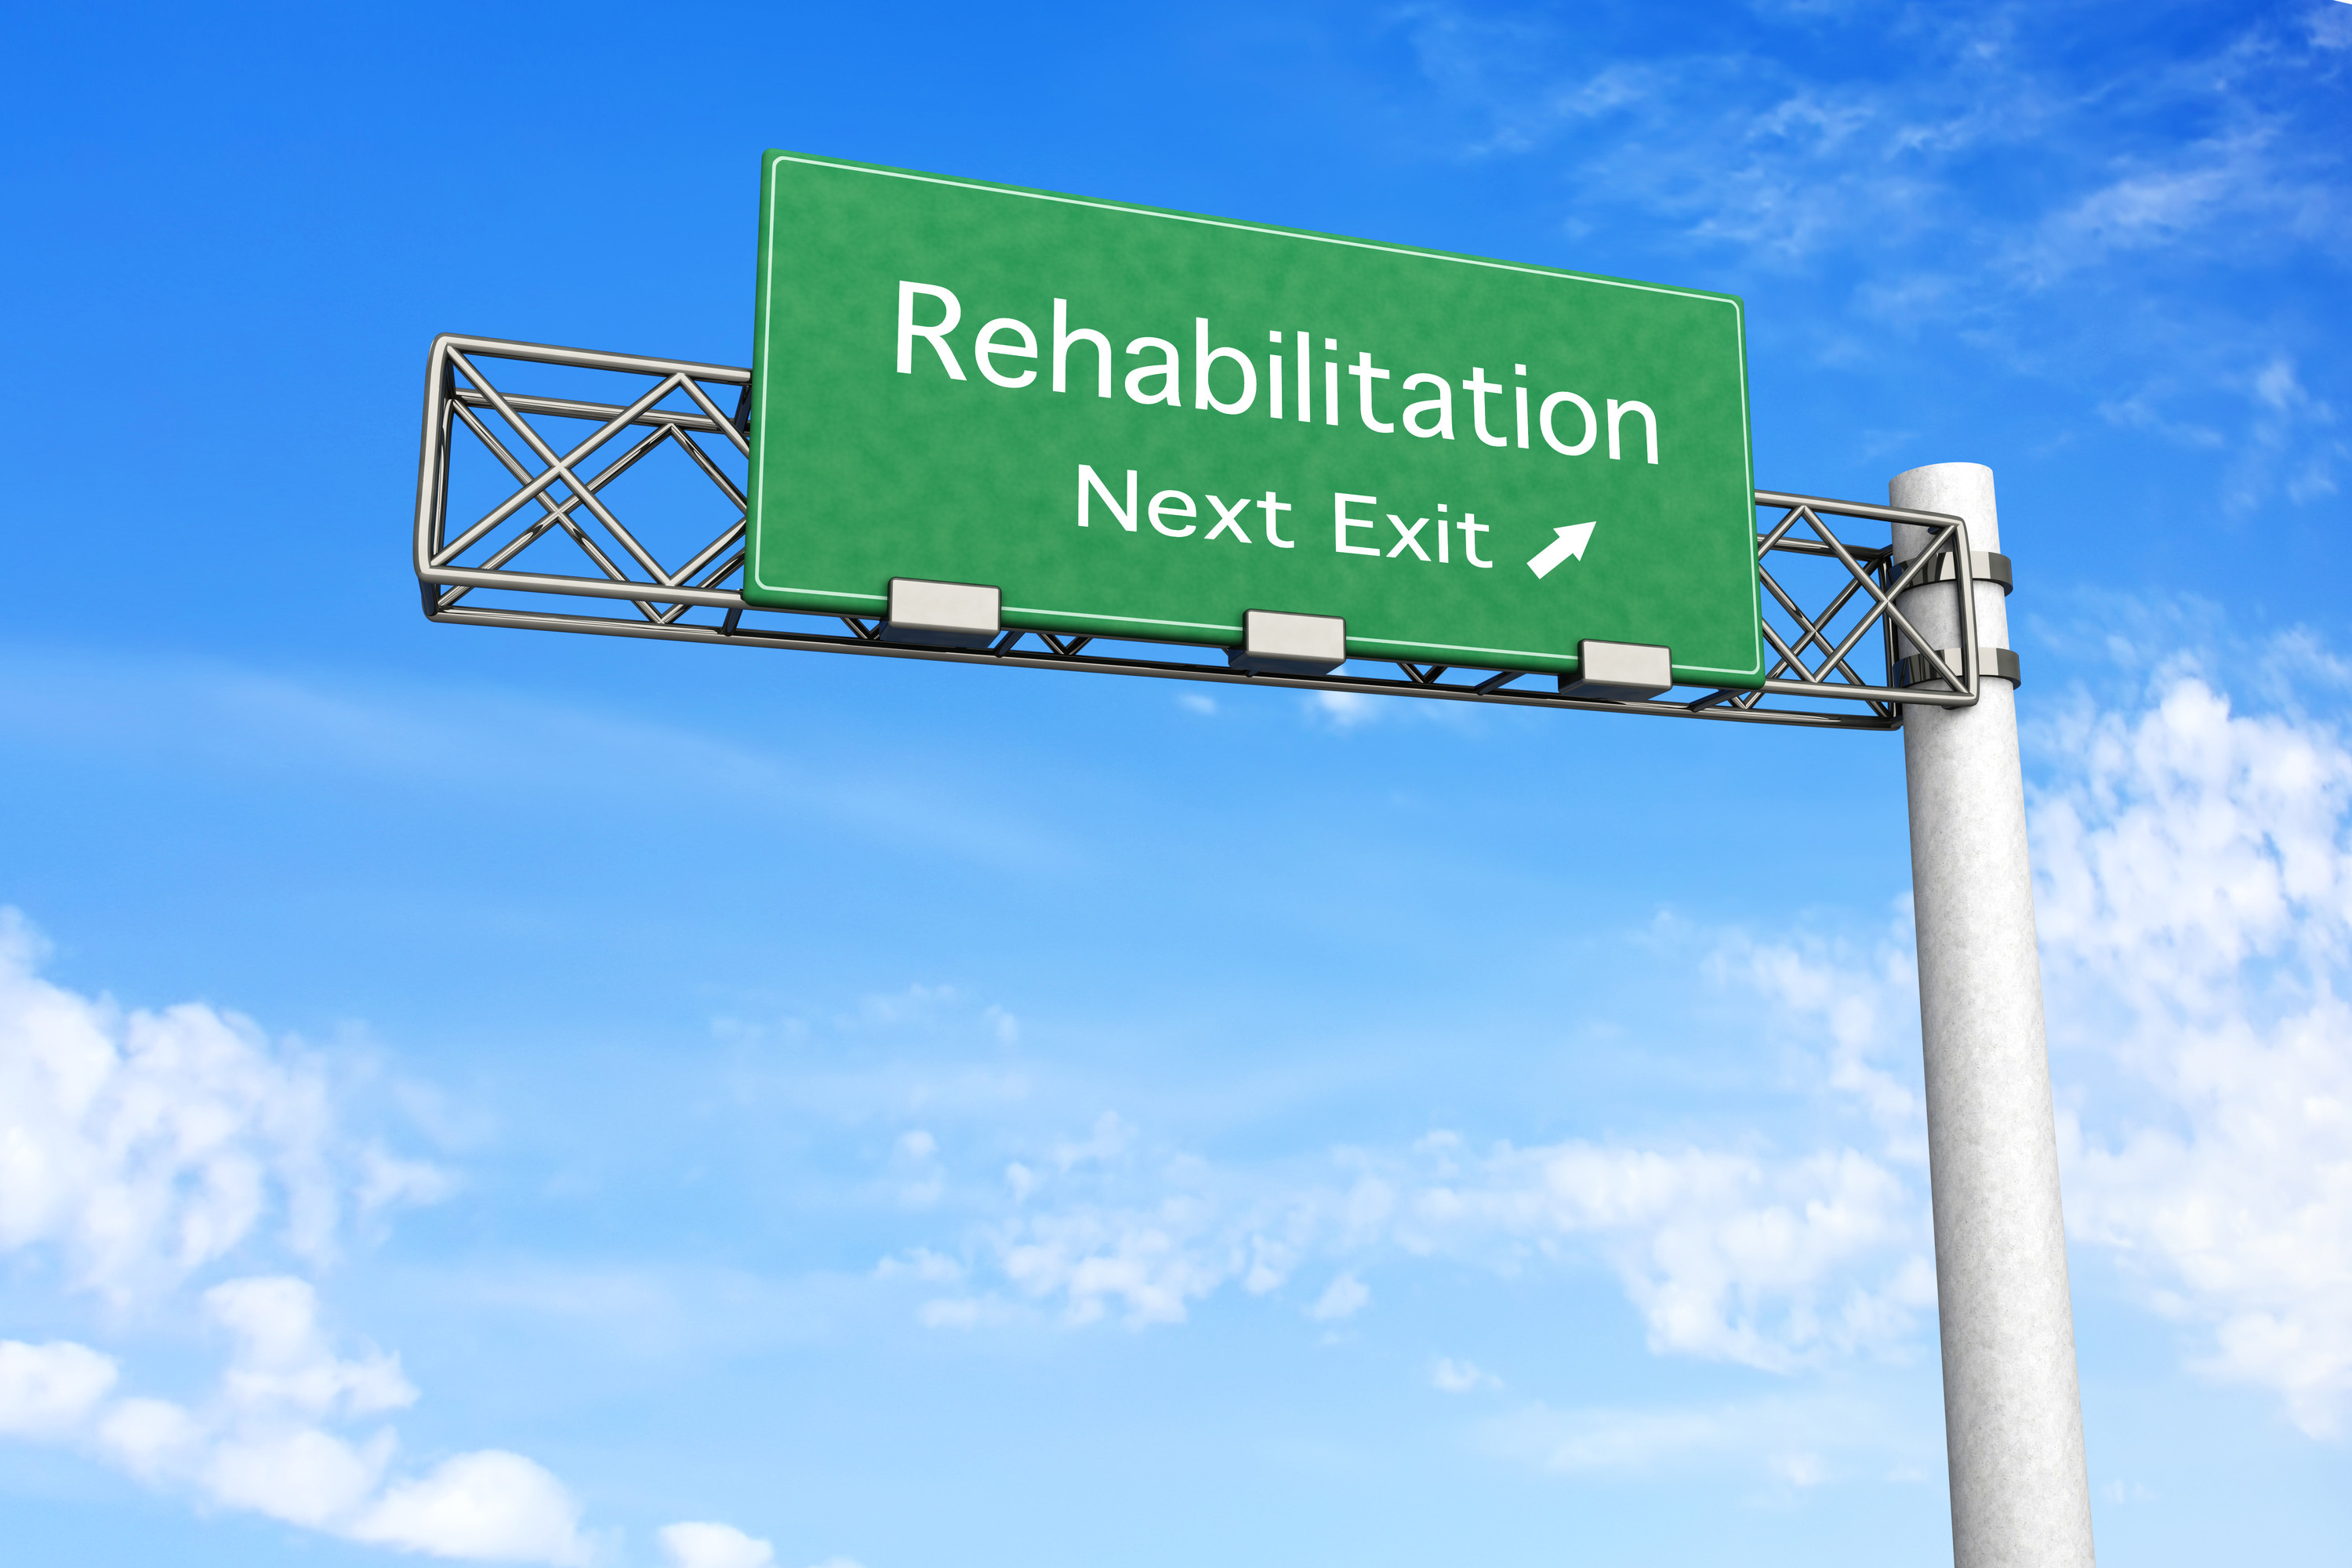 State Funded Drug Rehabs in Arizona